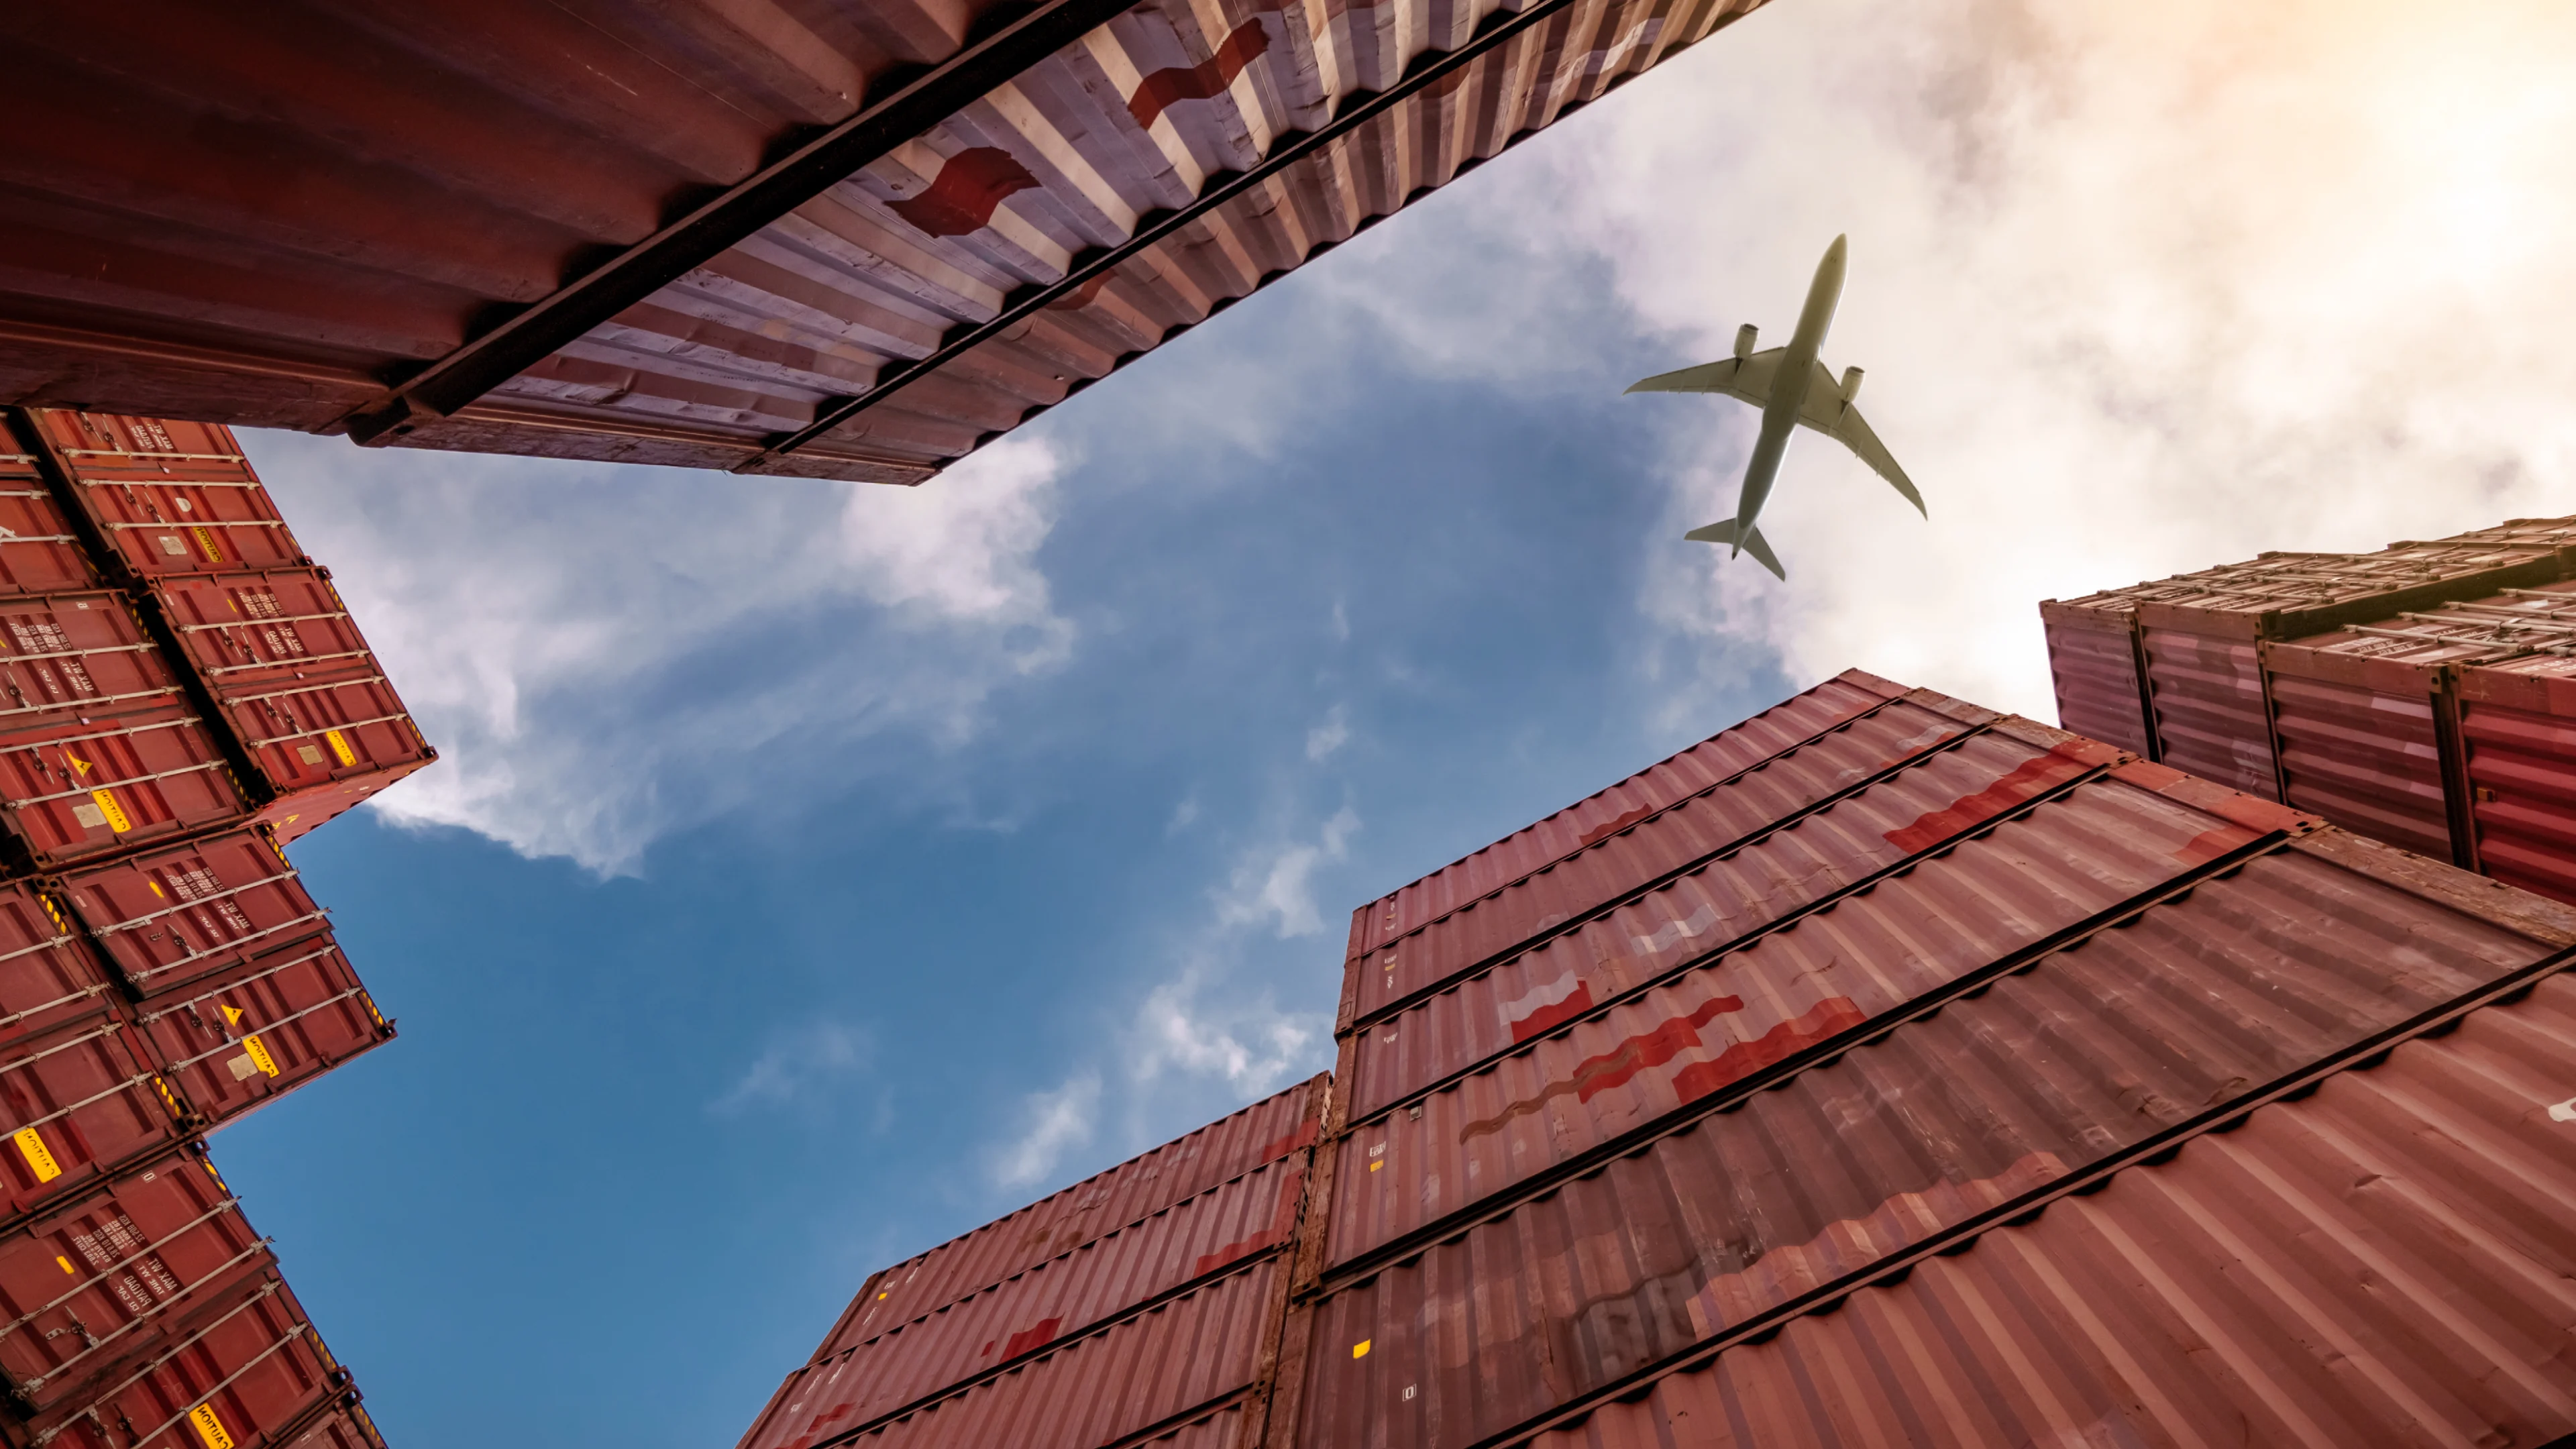 Descriptive image of logistics with an airplane and shipping containers.